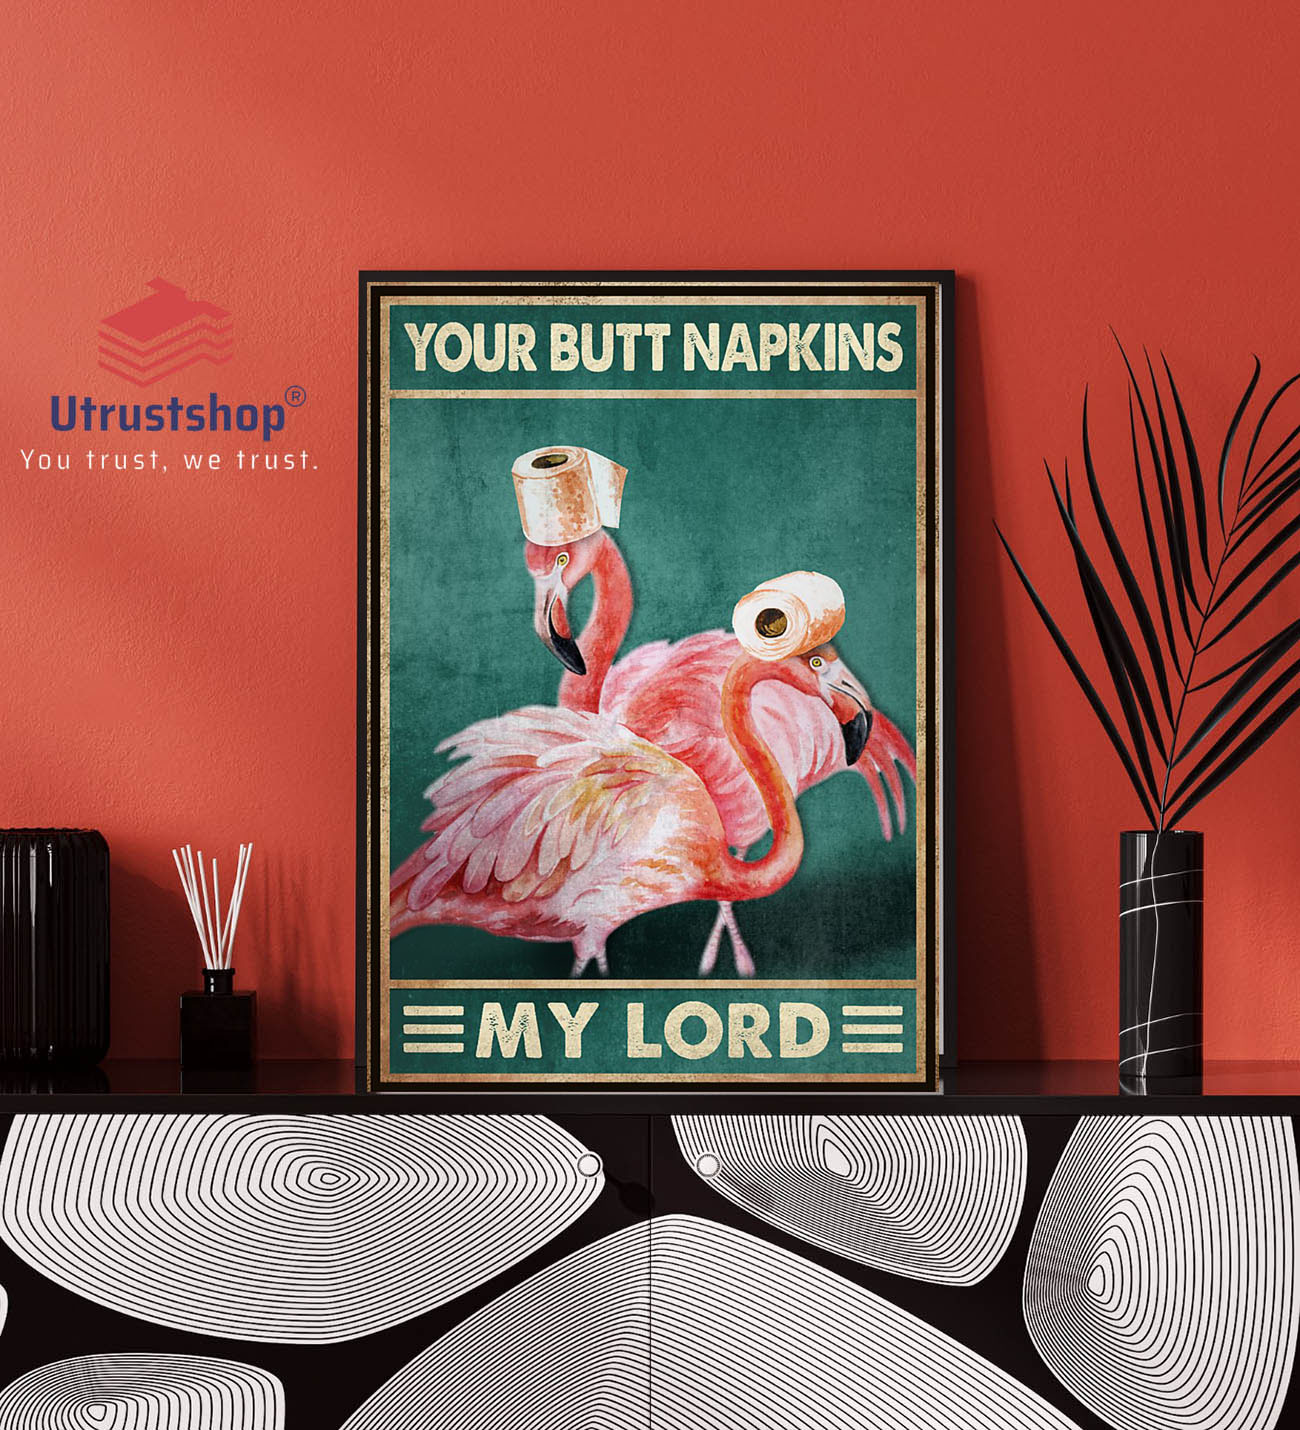 Your butt napkins my lord poster